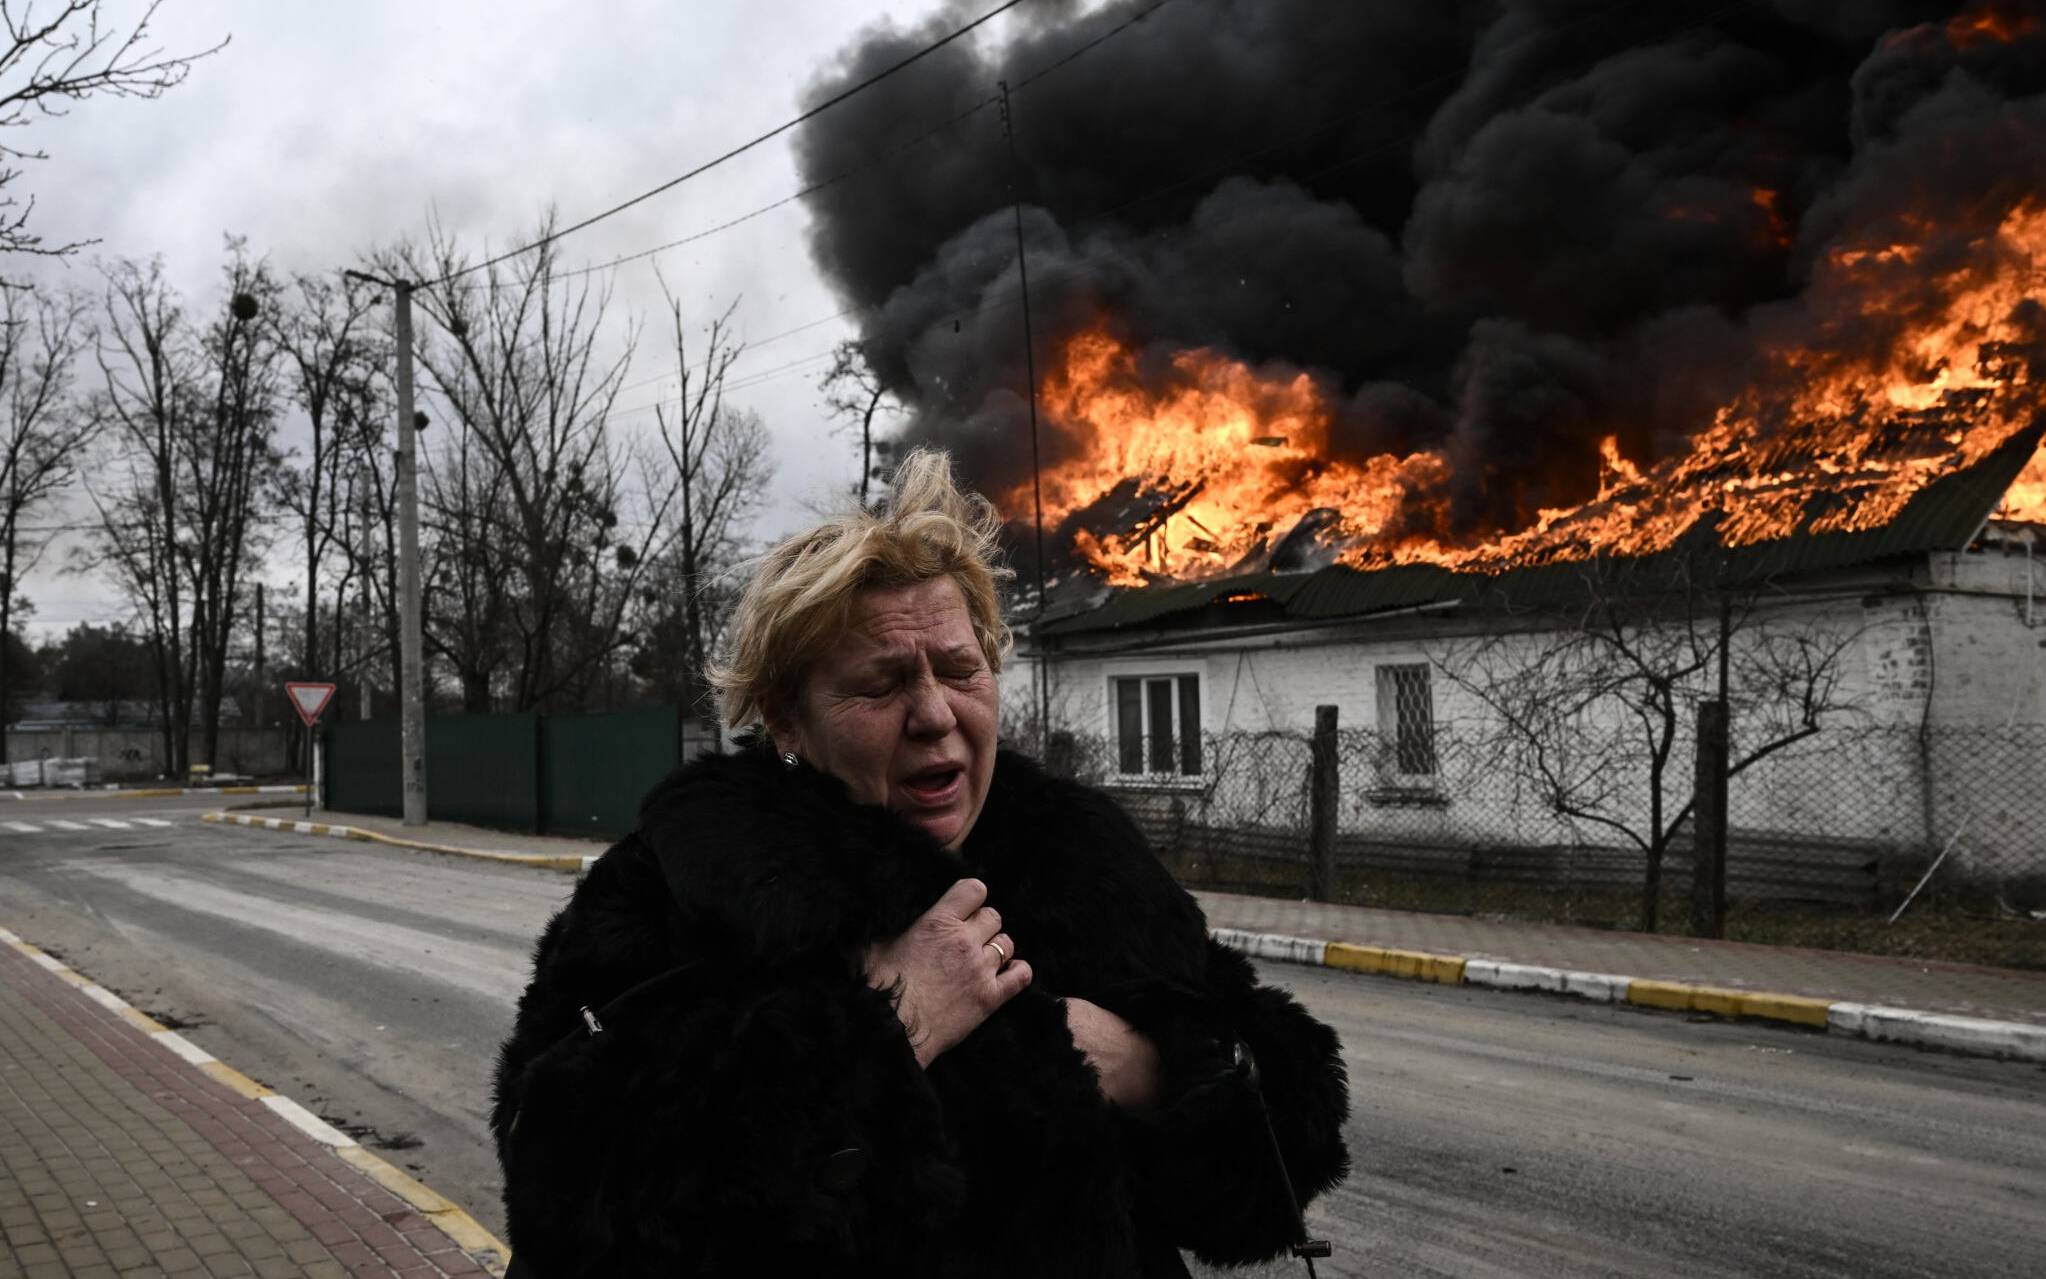 A woman reacts as she stands in front of a house burning after being shelled in the city of Irpin, outside Kyiv, on March 4, 2022. - More than 1.2 million people have fled Ukraine into neighbouring countries since Russia launched its full-scale invasion on February 24, United Nations figures showed on March 4, 2022. (Photo by Aris Messinis / AFP)